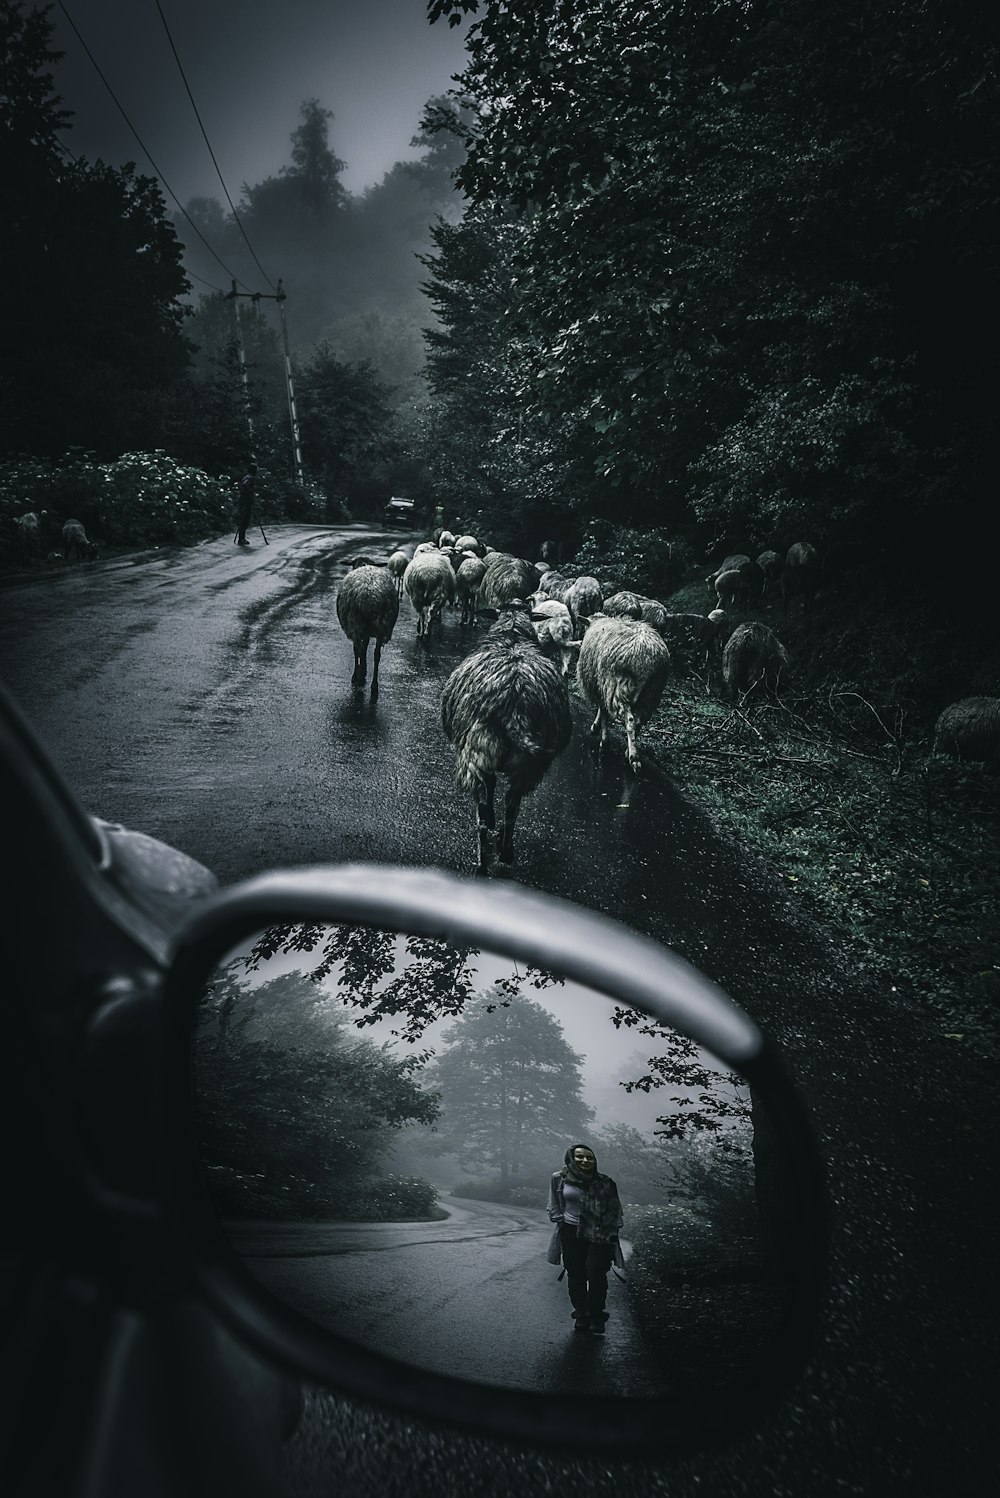 grayscale photo of sheep on road during daytime